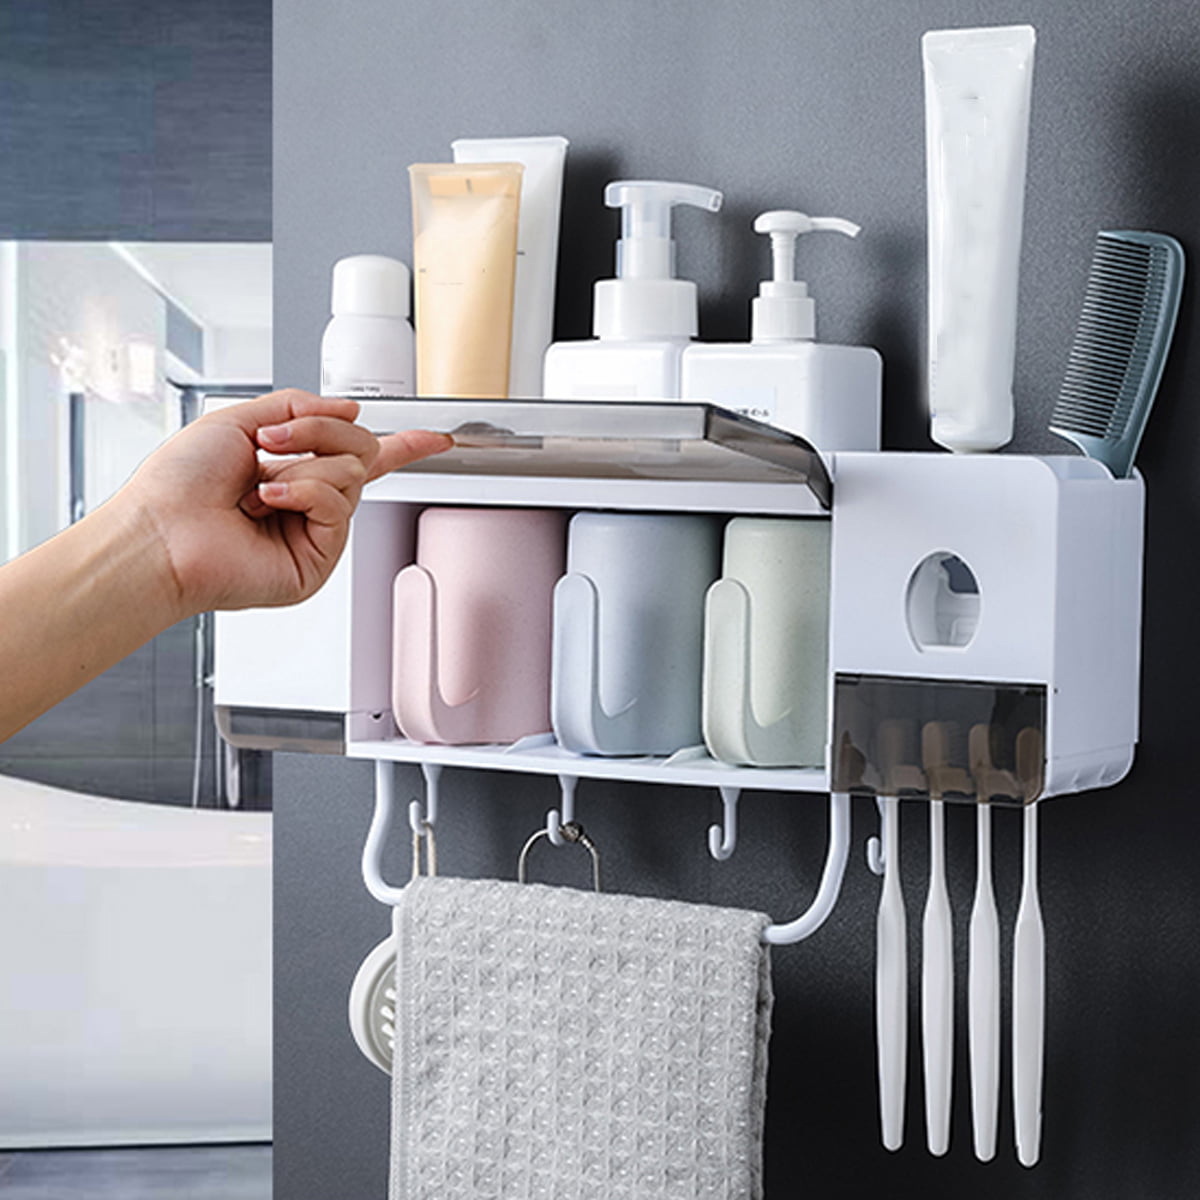 Details about   Toothpaste Toothbrush Holder Home Bathroom Wall Mount Stand Storage Rack 